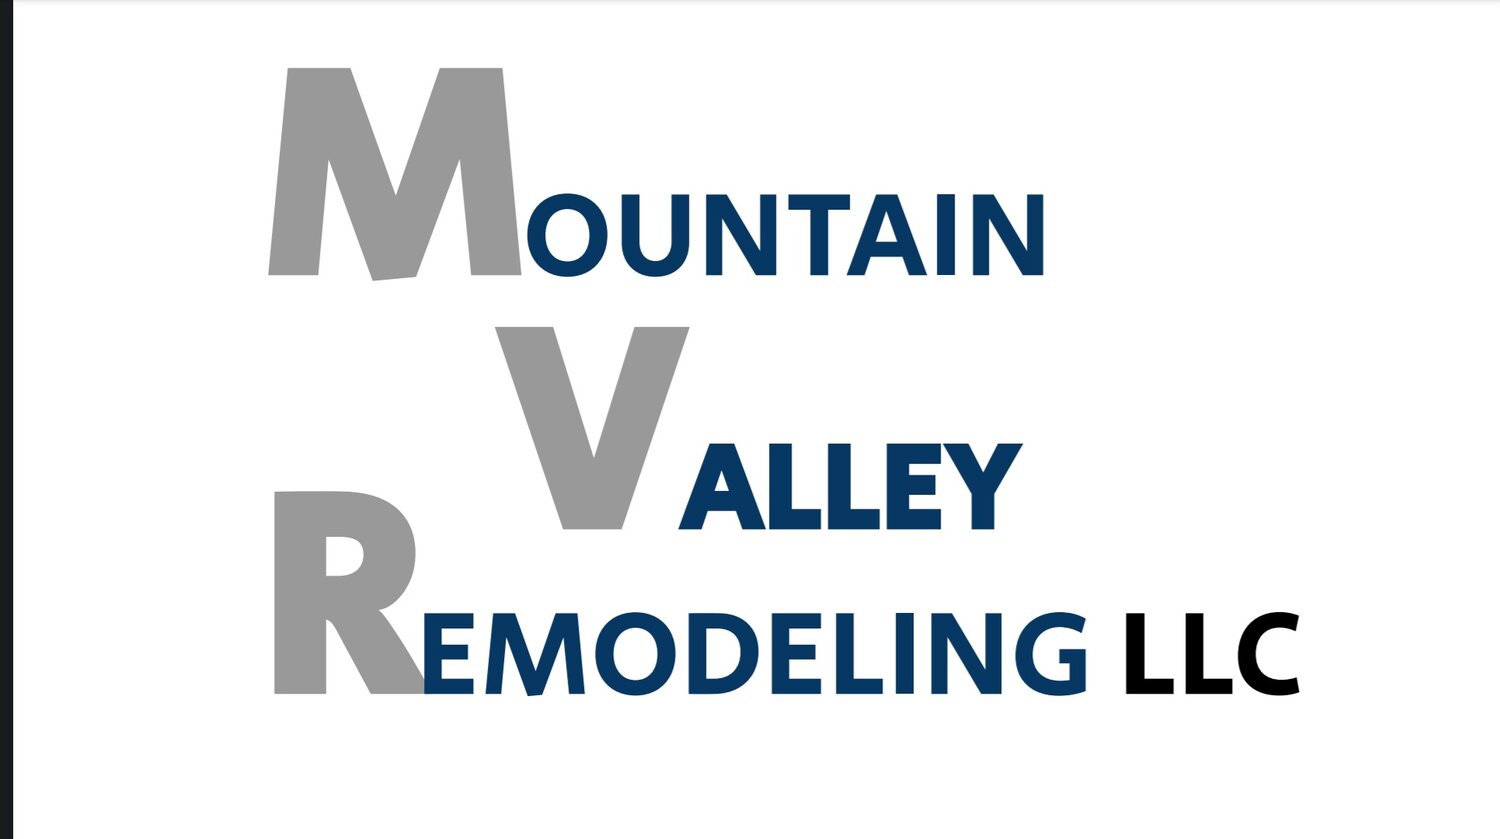 Mountain Valley Remodeling LLC